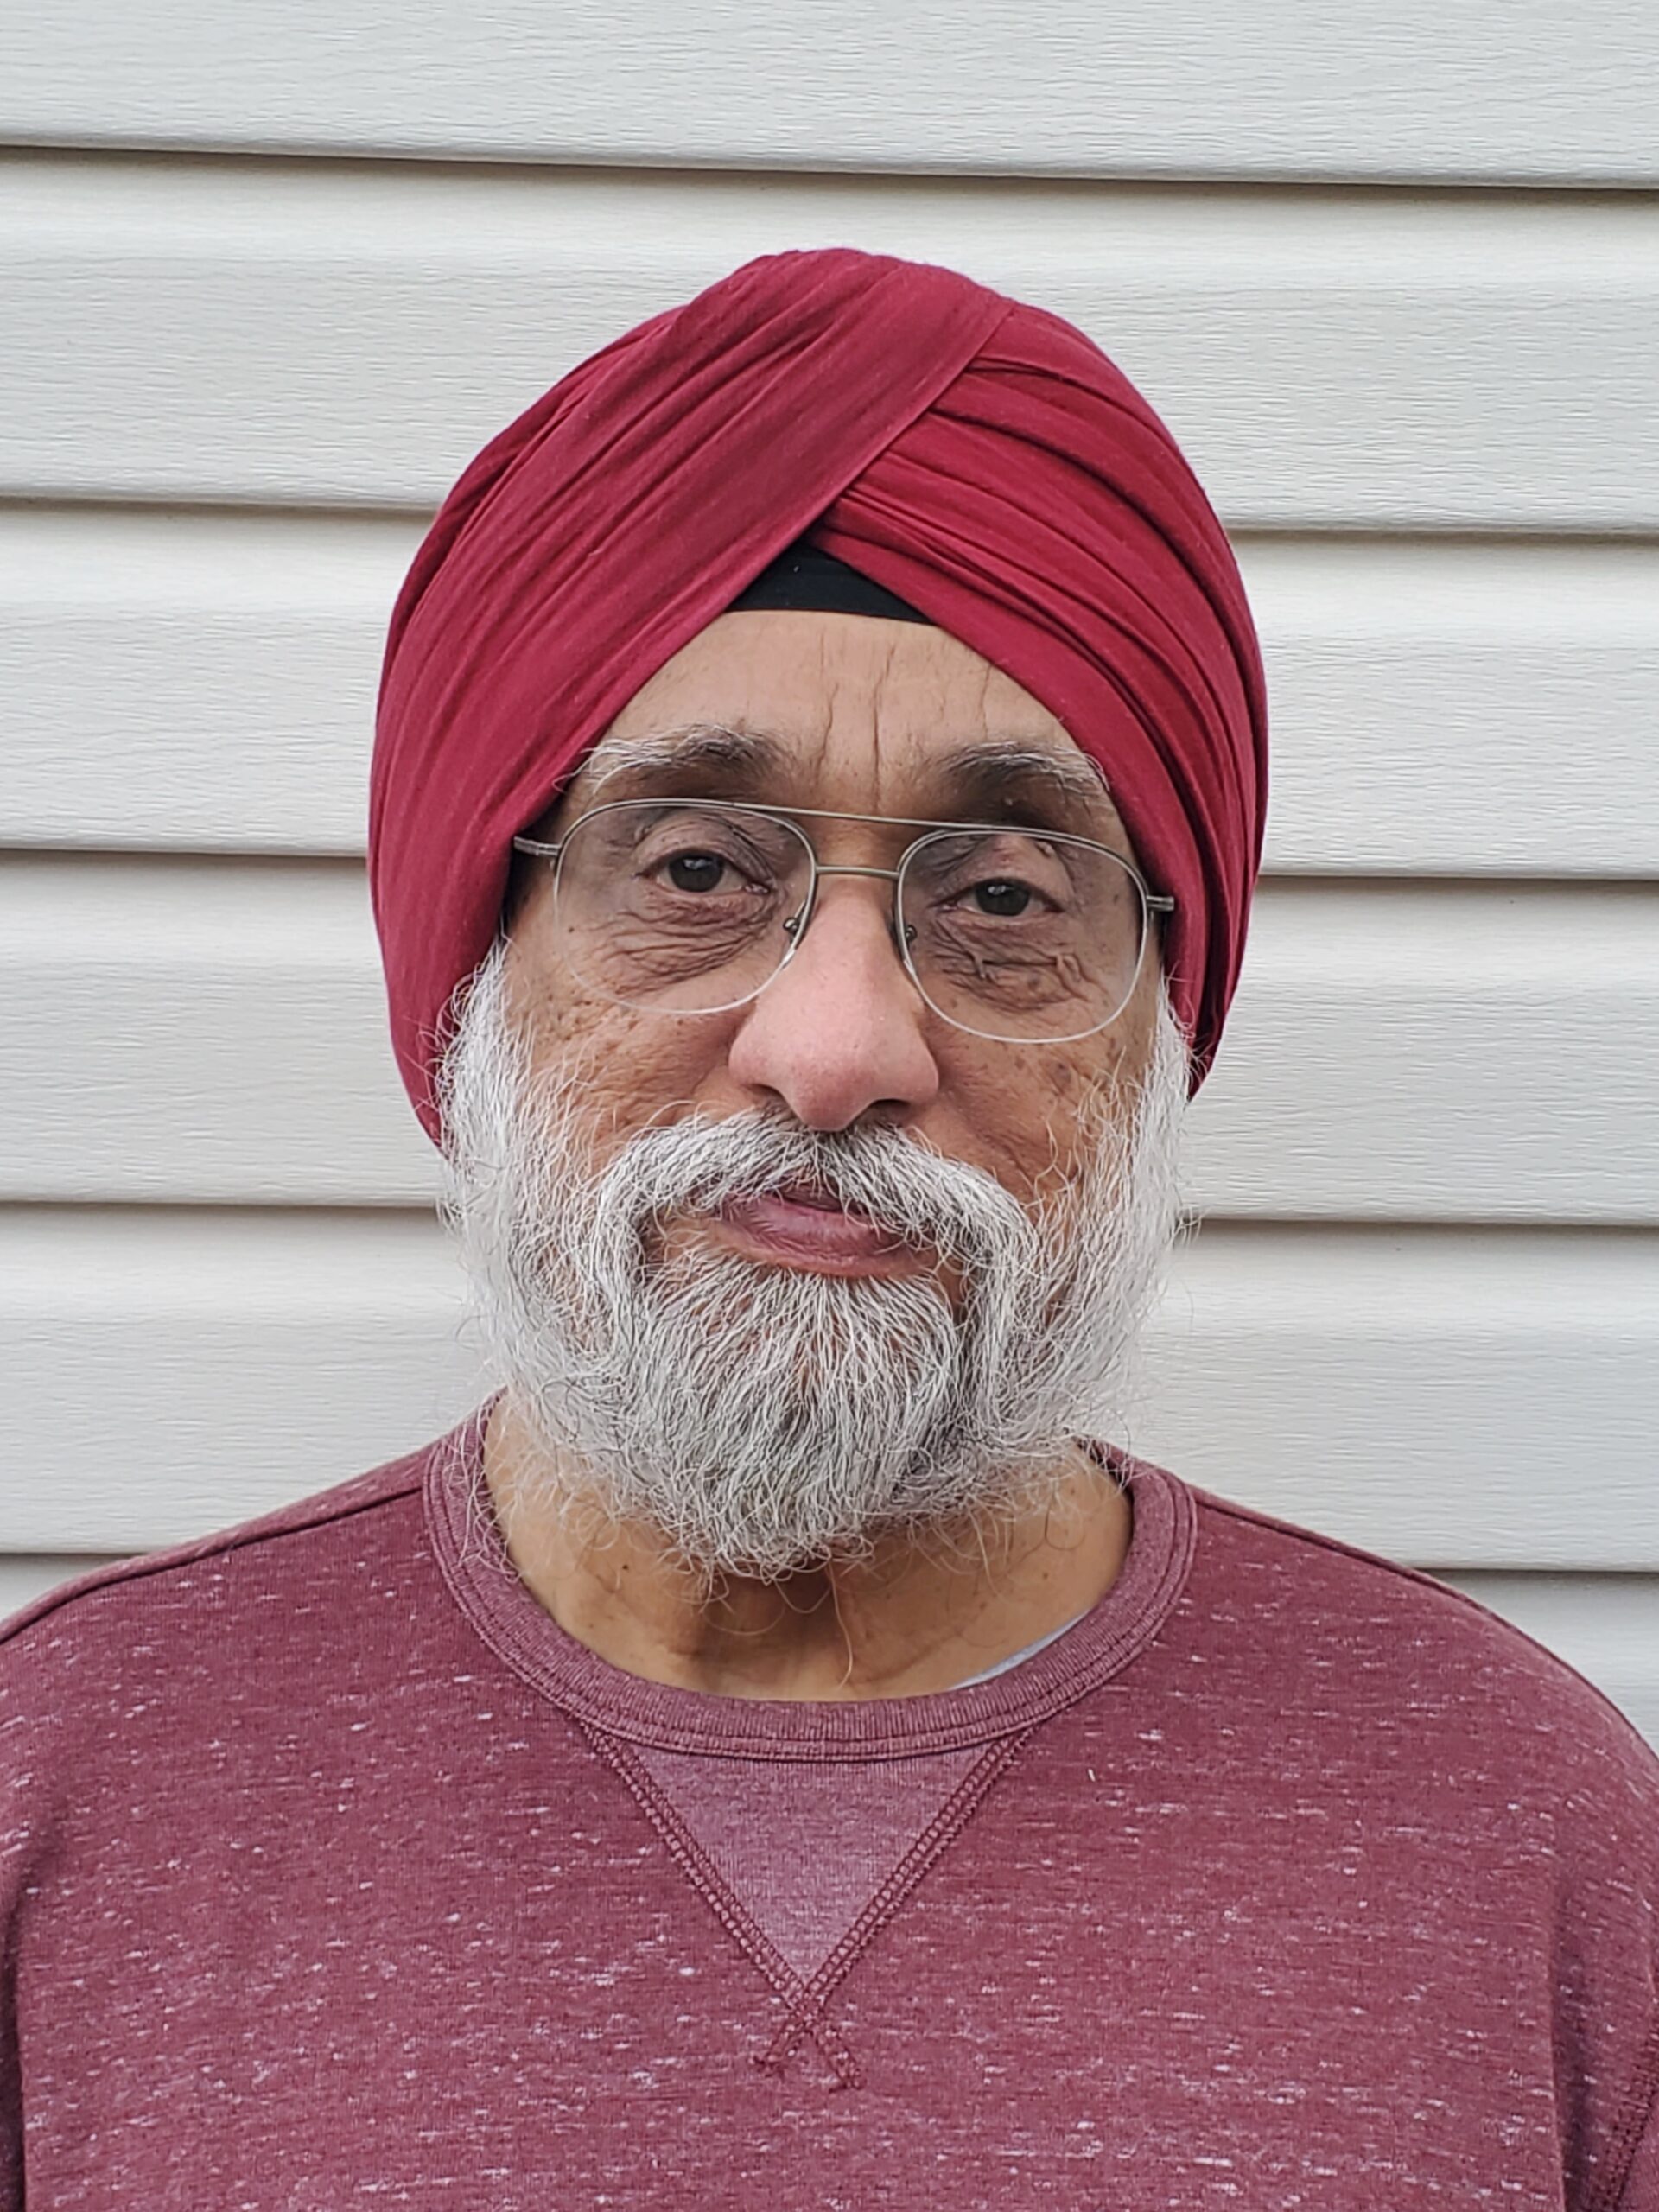 Man wearing a red turbin and red shirt. Has a grey beard and mustach and wears glasses.